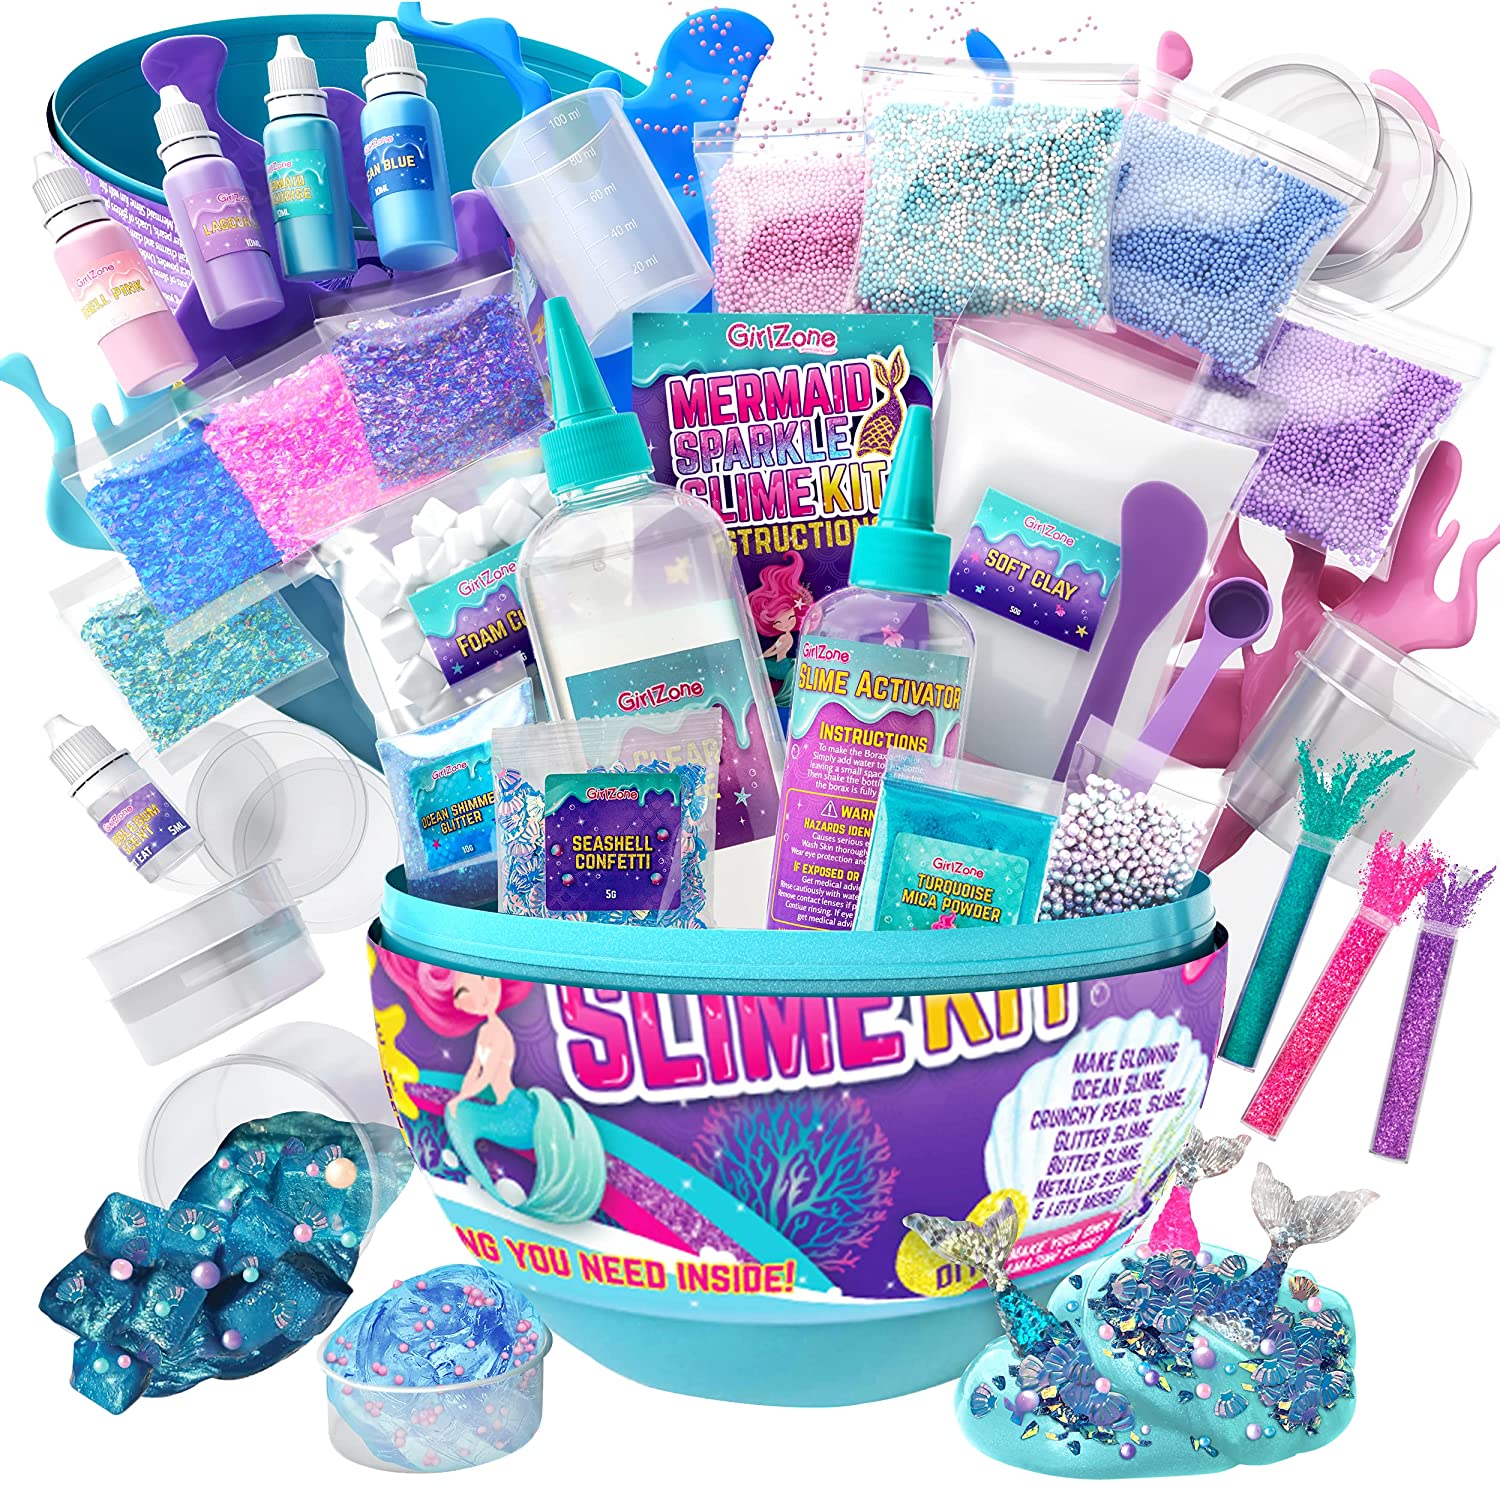 Mermaid Sparkle Slime Kit for Girls, Measures 9.5 Inches High, 39 Pieces to Make DIY Glow in The Dark Slime with Lots of Glitter Slime Add In’s